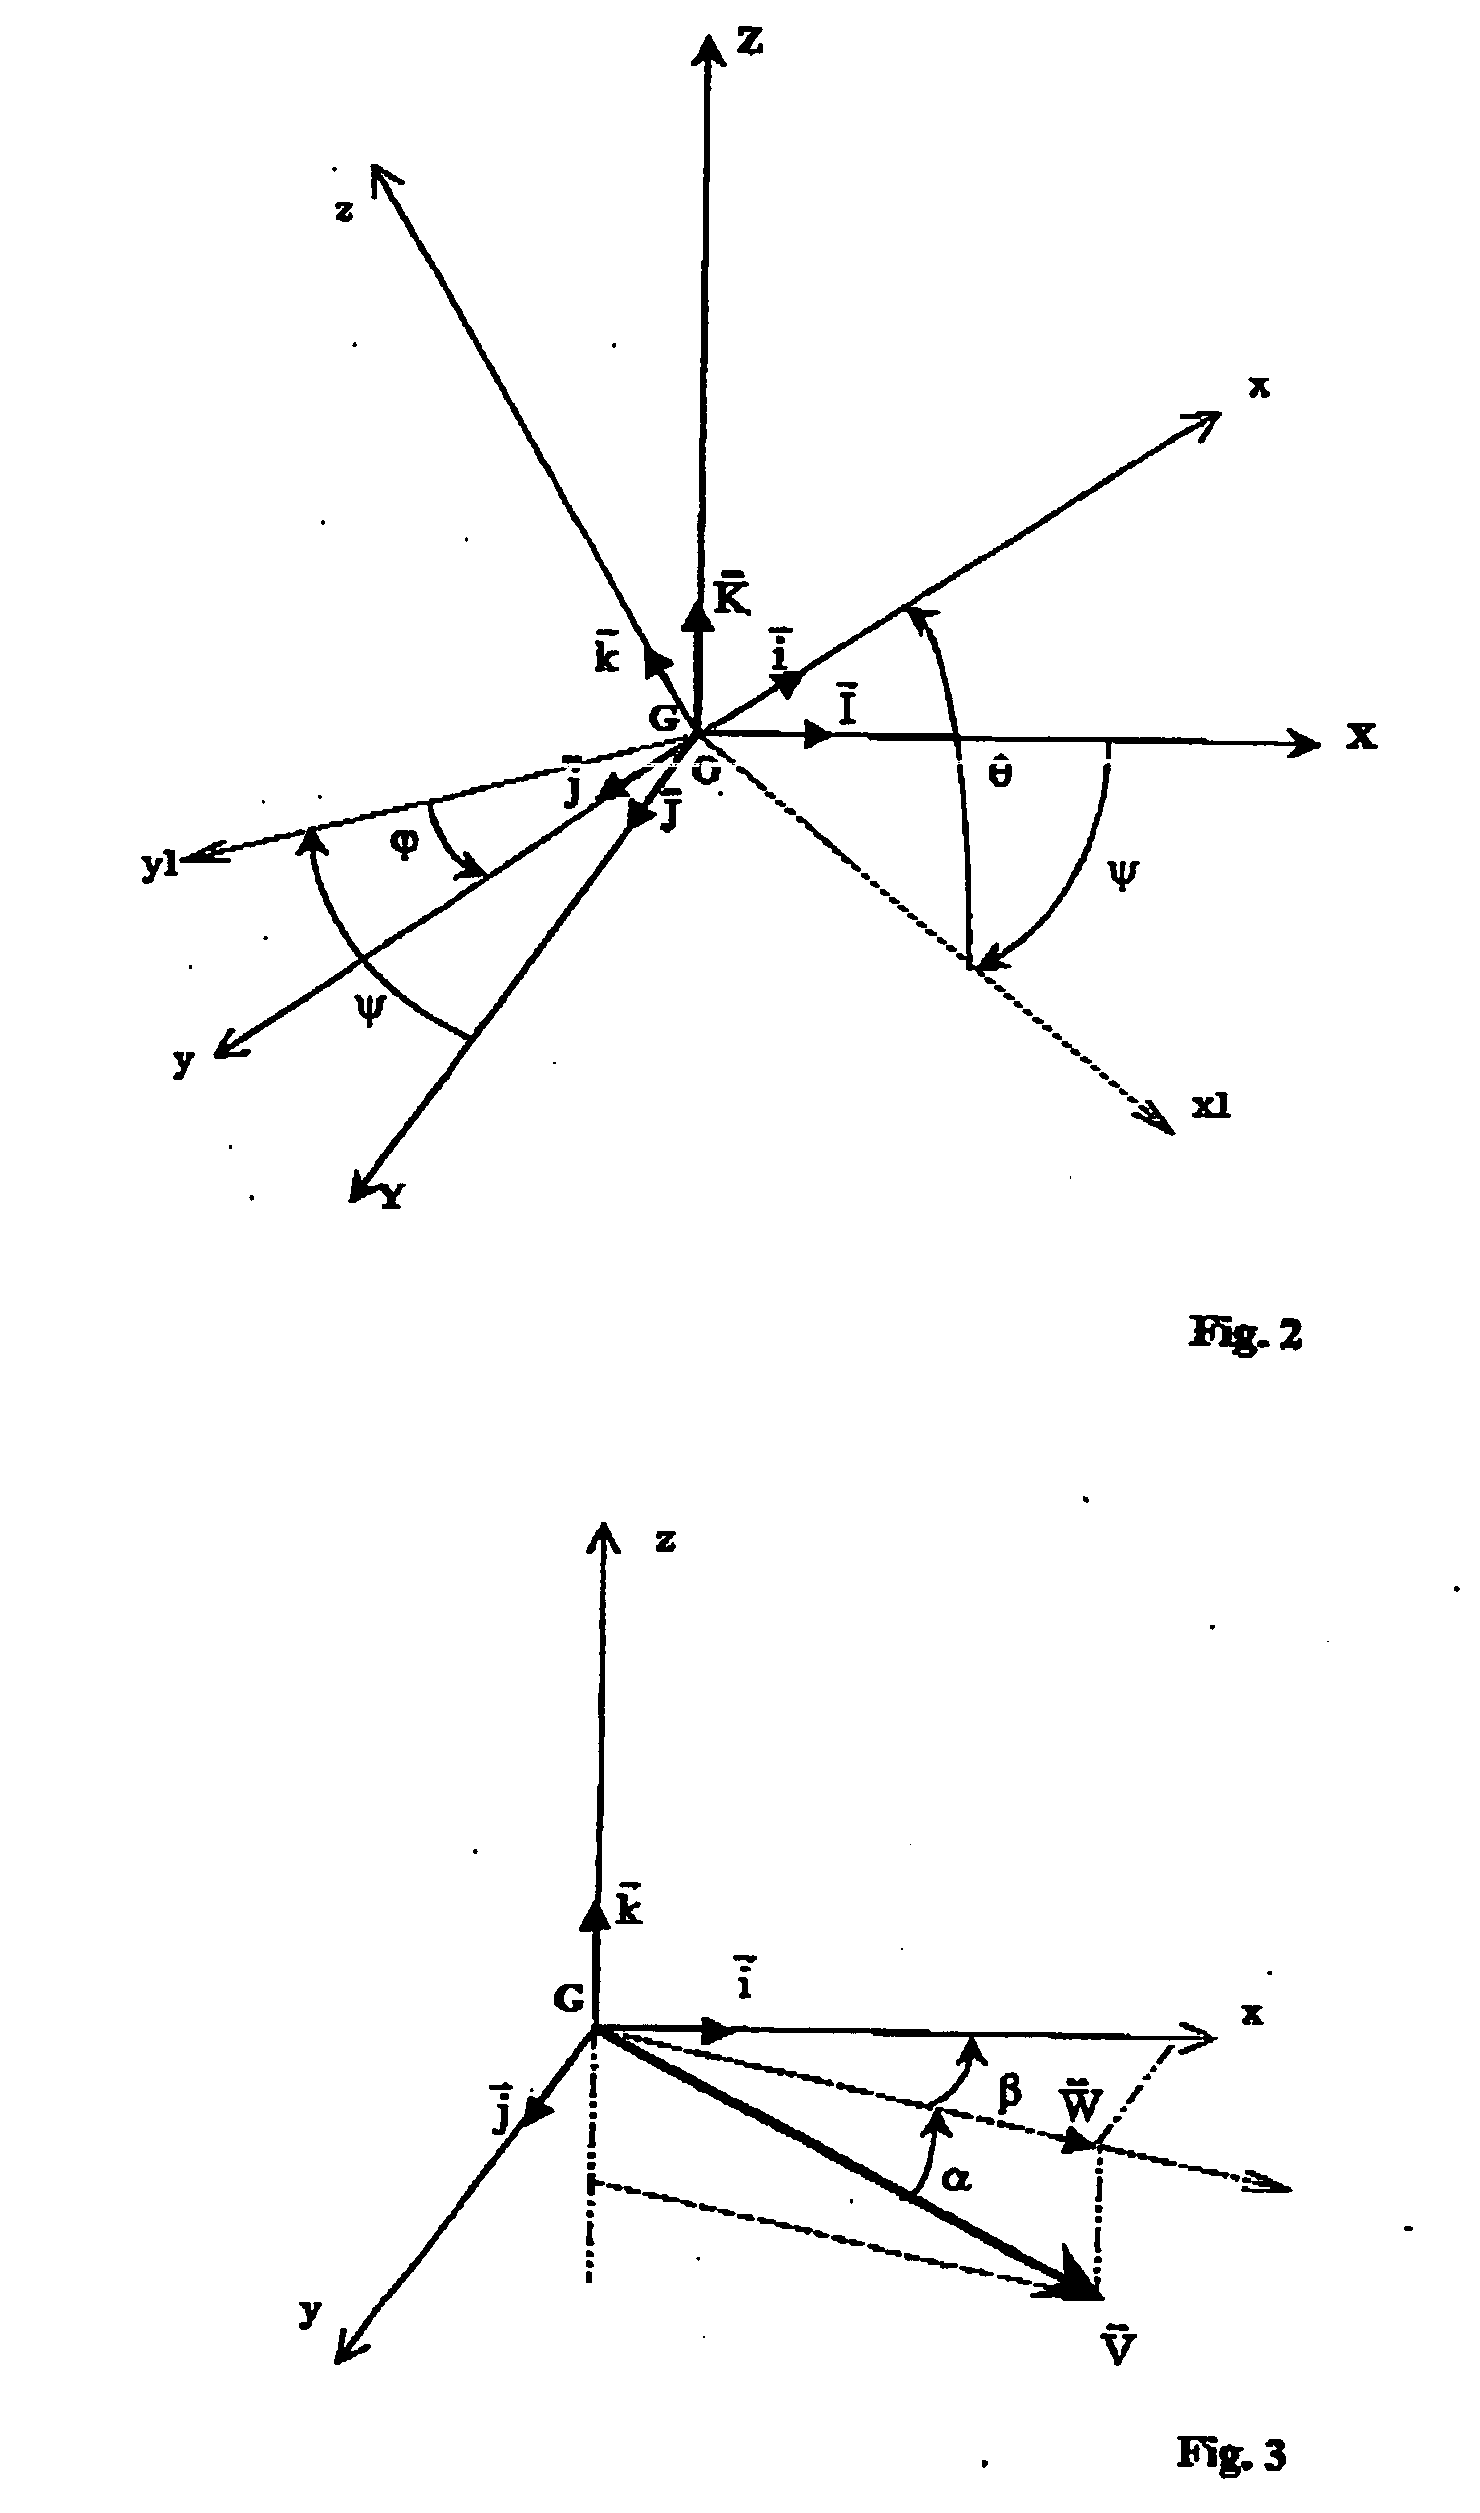 Process to control the trajectory of a spinning projectile